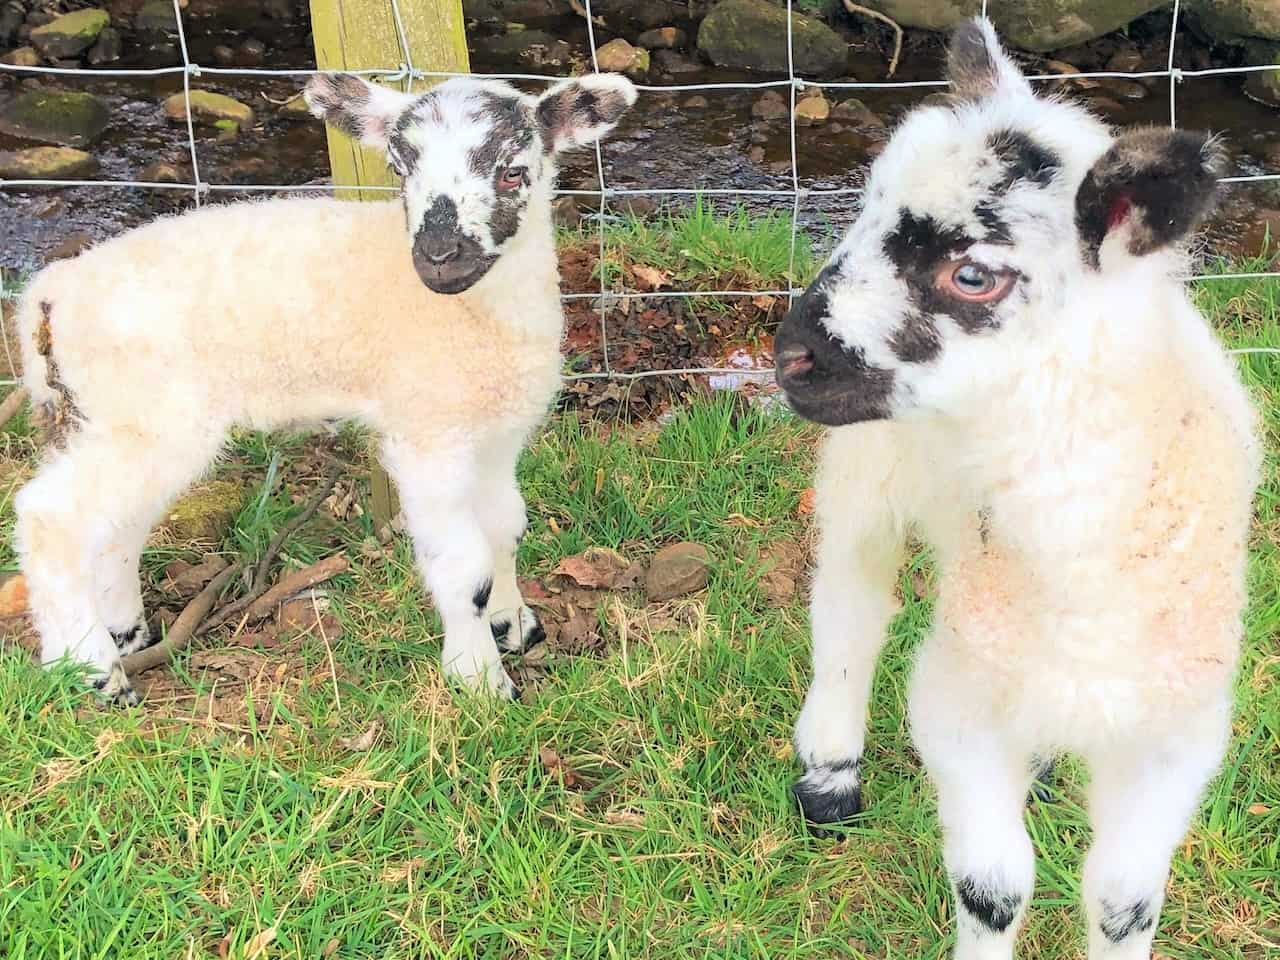 It's Spring, and the farmers' fields are full of cute baby lambs.